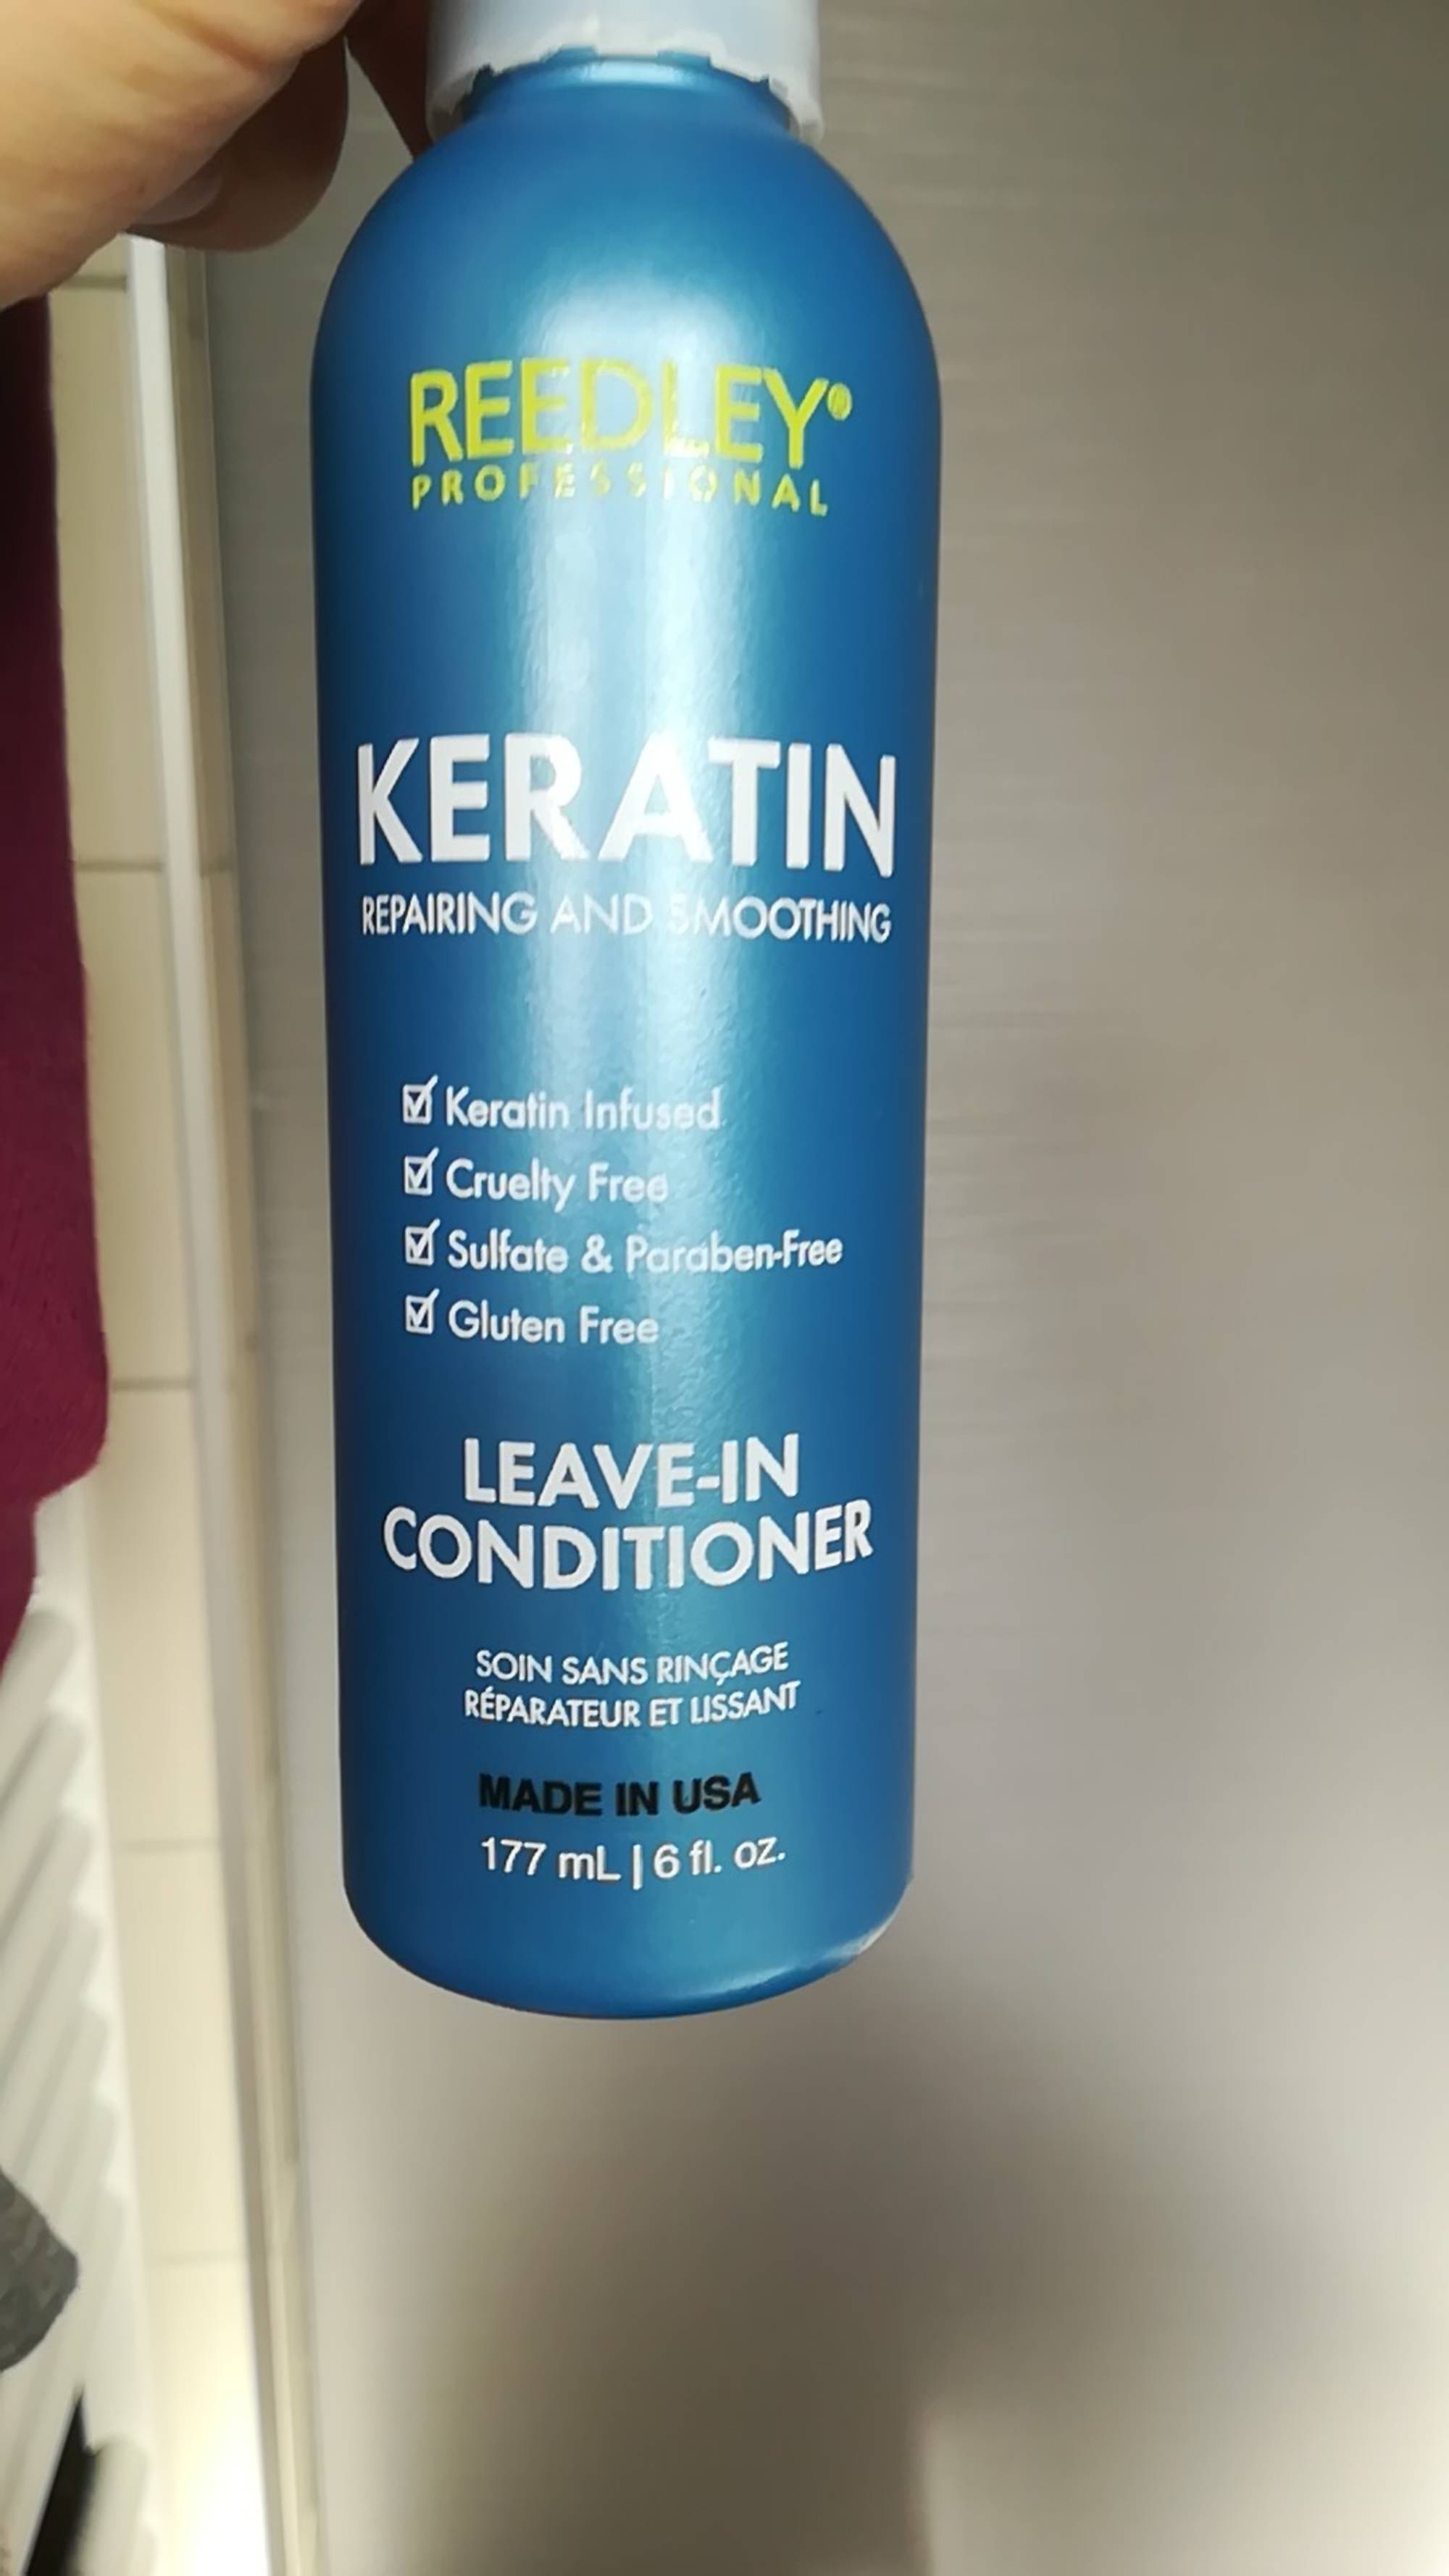 REEDLEY PROFESSIONAL - Keratin - Repairing and smoothing - Leave-in conditioner